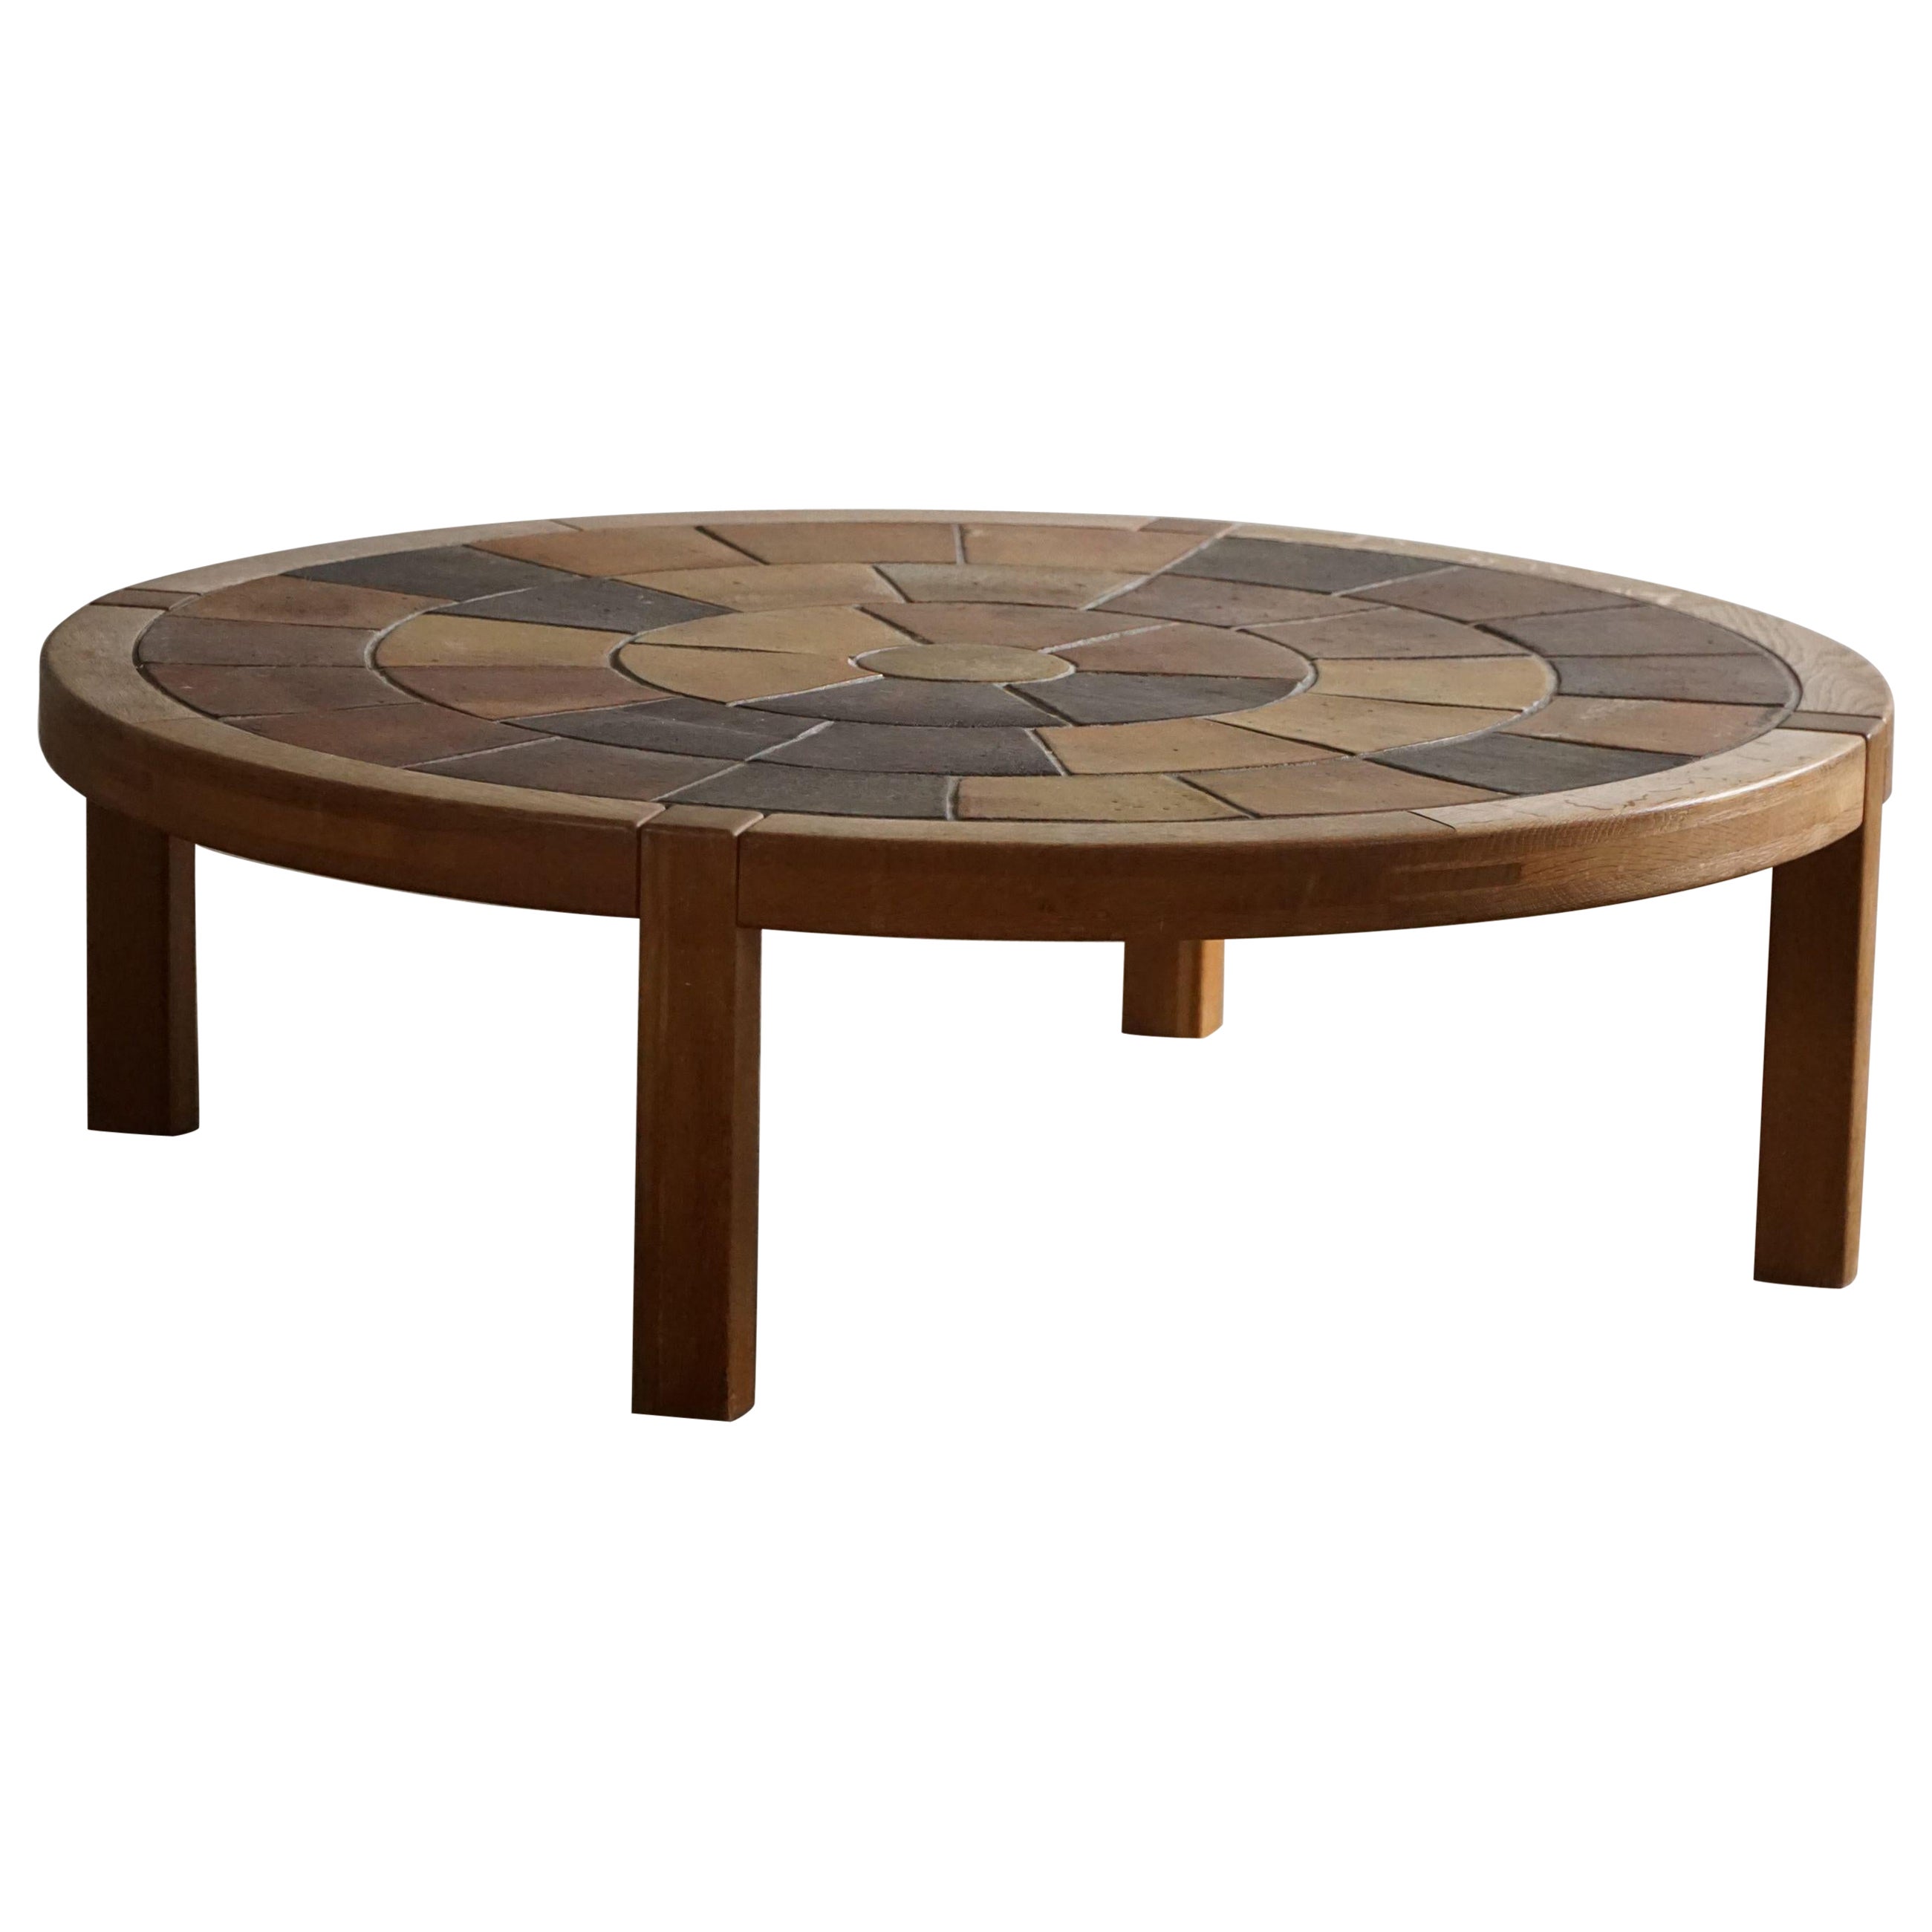 Danish Modern, Round Coffee Table with Ceramic Tiles by Sallingeboe, 1981 For Sale